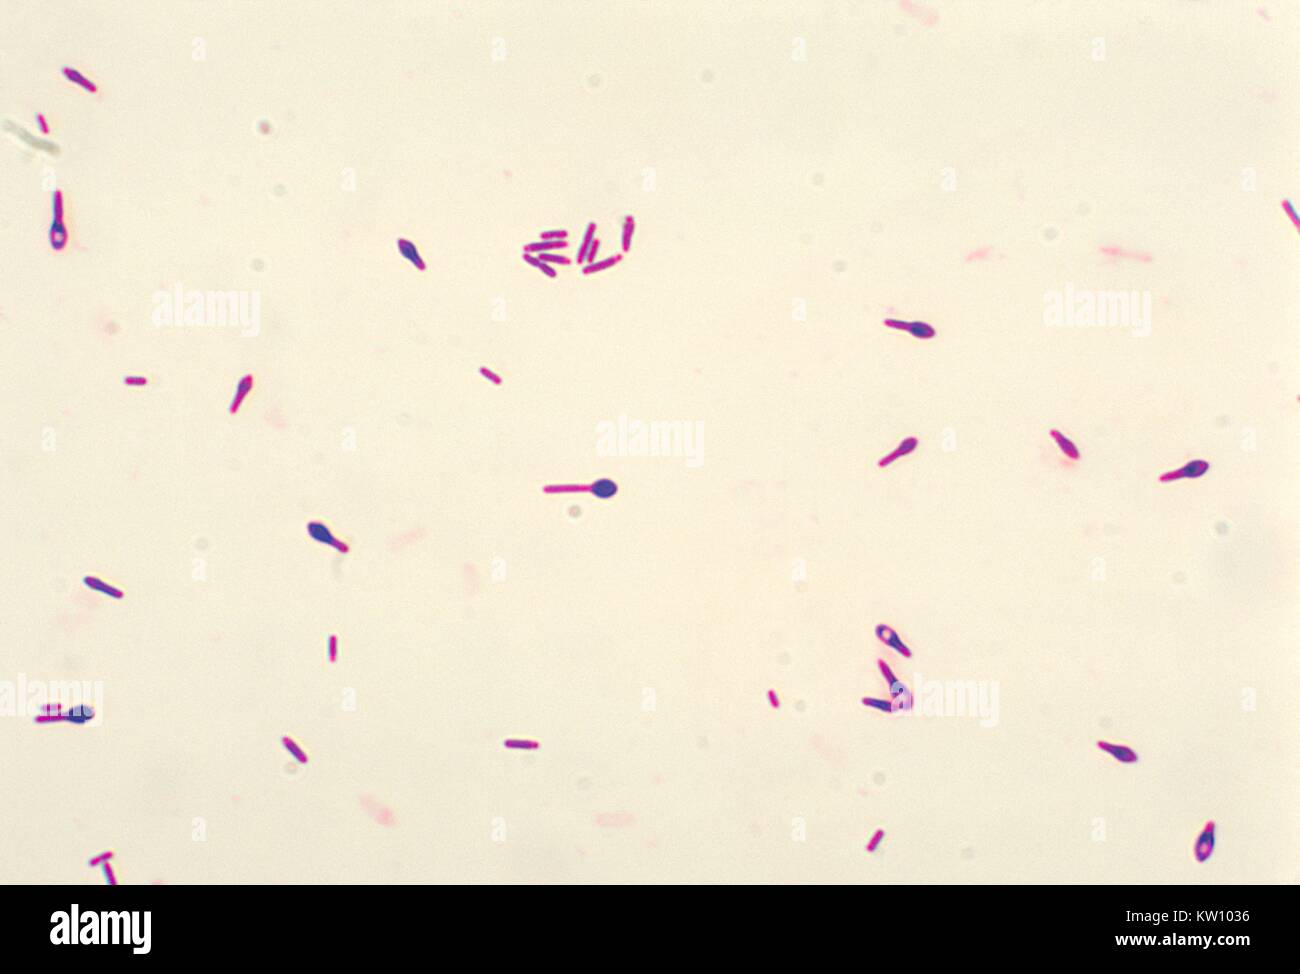 A photomicrograph of Clostridium botulinum type A viewed using a Gram stain technique. These C. botulinum bacteria were cultured in thioglycollate broth for 48 hours at 35 degrees Centigrade. The bacterium C. botulinum produces a nerve toxin, which causes the rare, but serious paralytic illness Botulism. Image courtesy CDC/Dr. George Lombard, 1978. Stock Photo